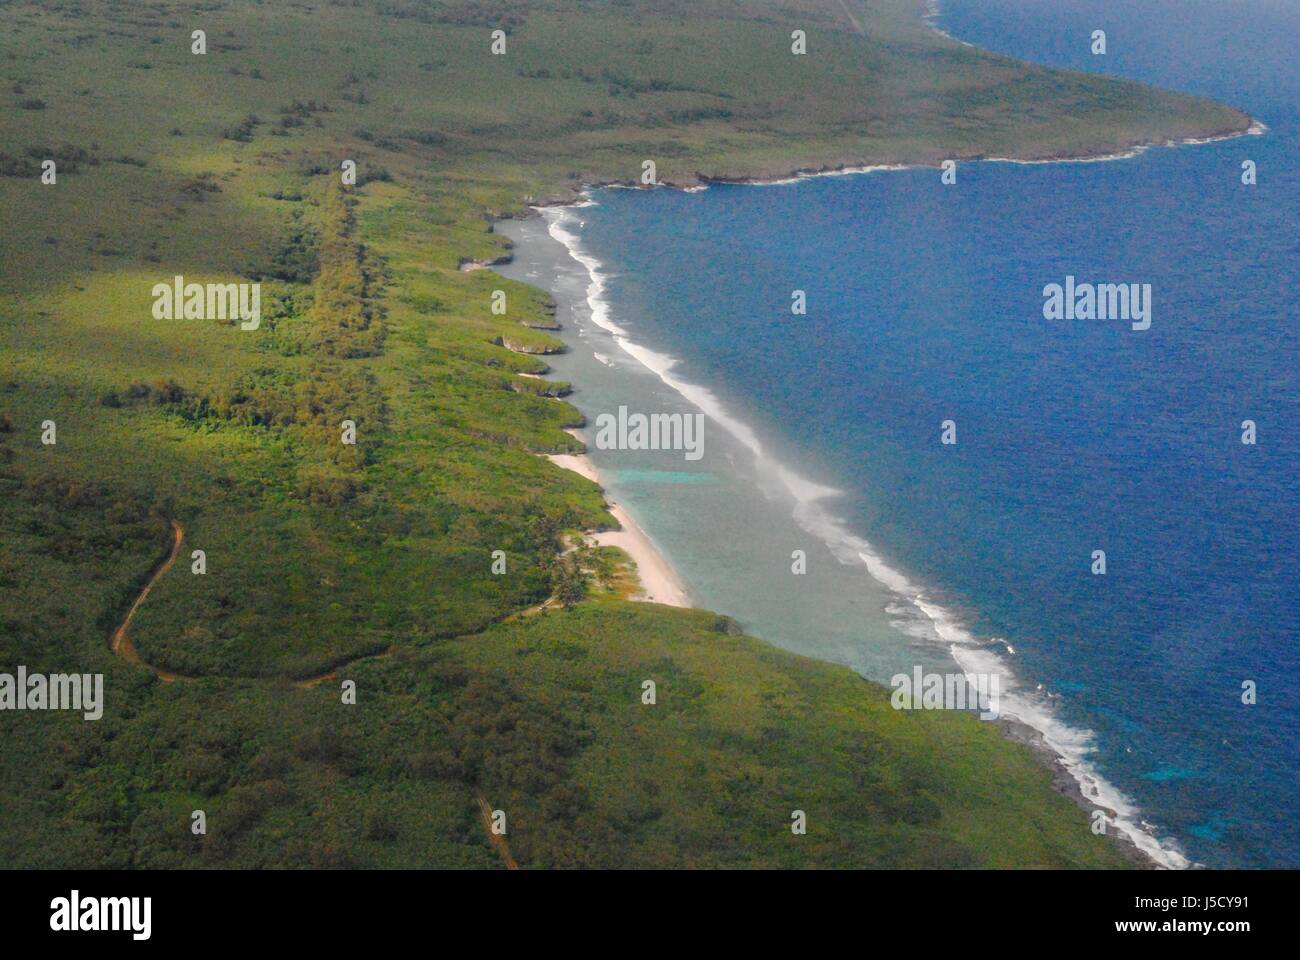 Picturesque aerial view of Tinian’s coast, Northern Mariana Islands Stock Photo